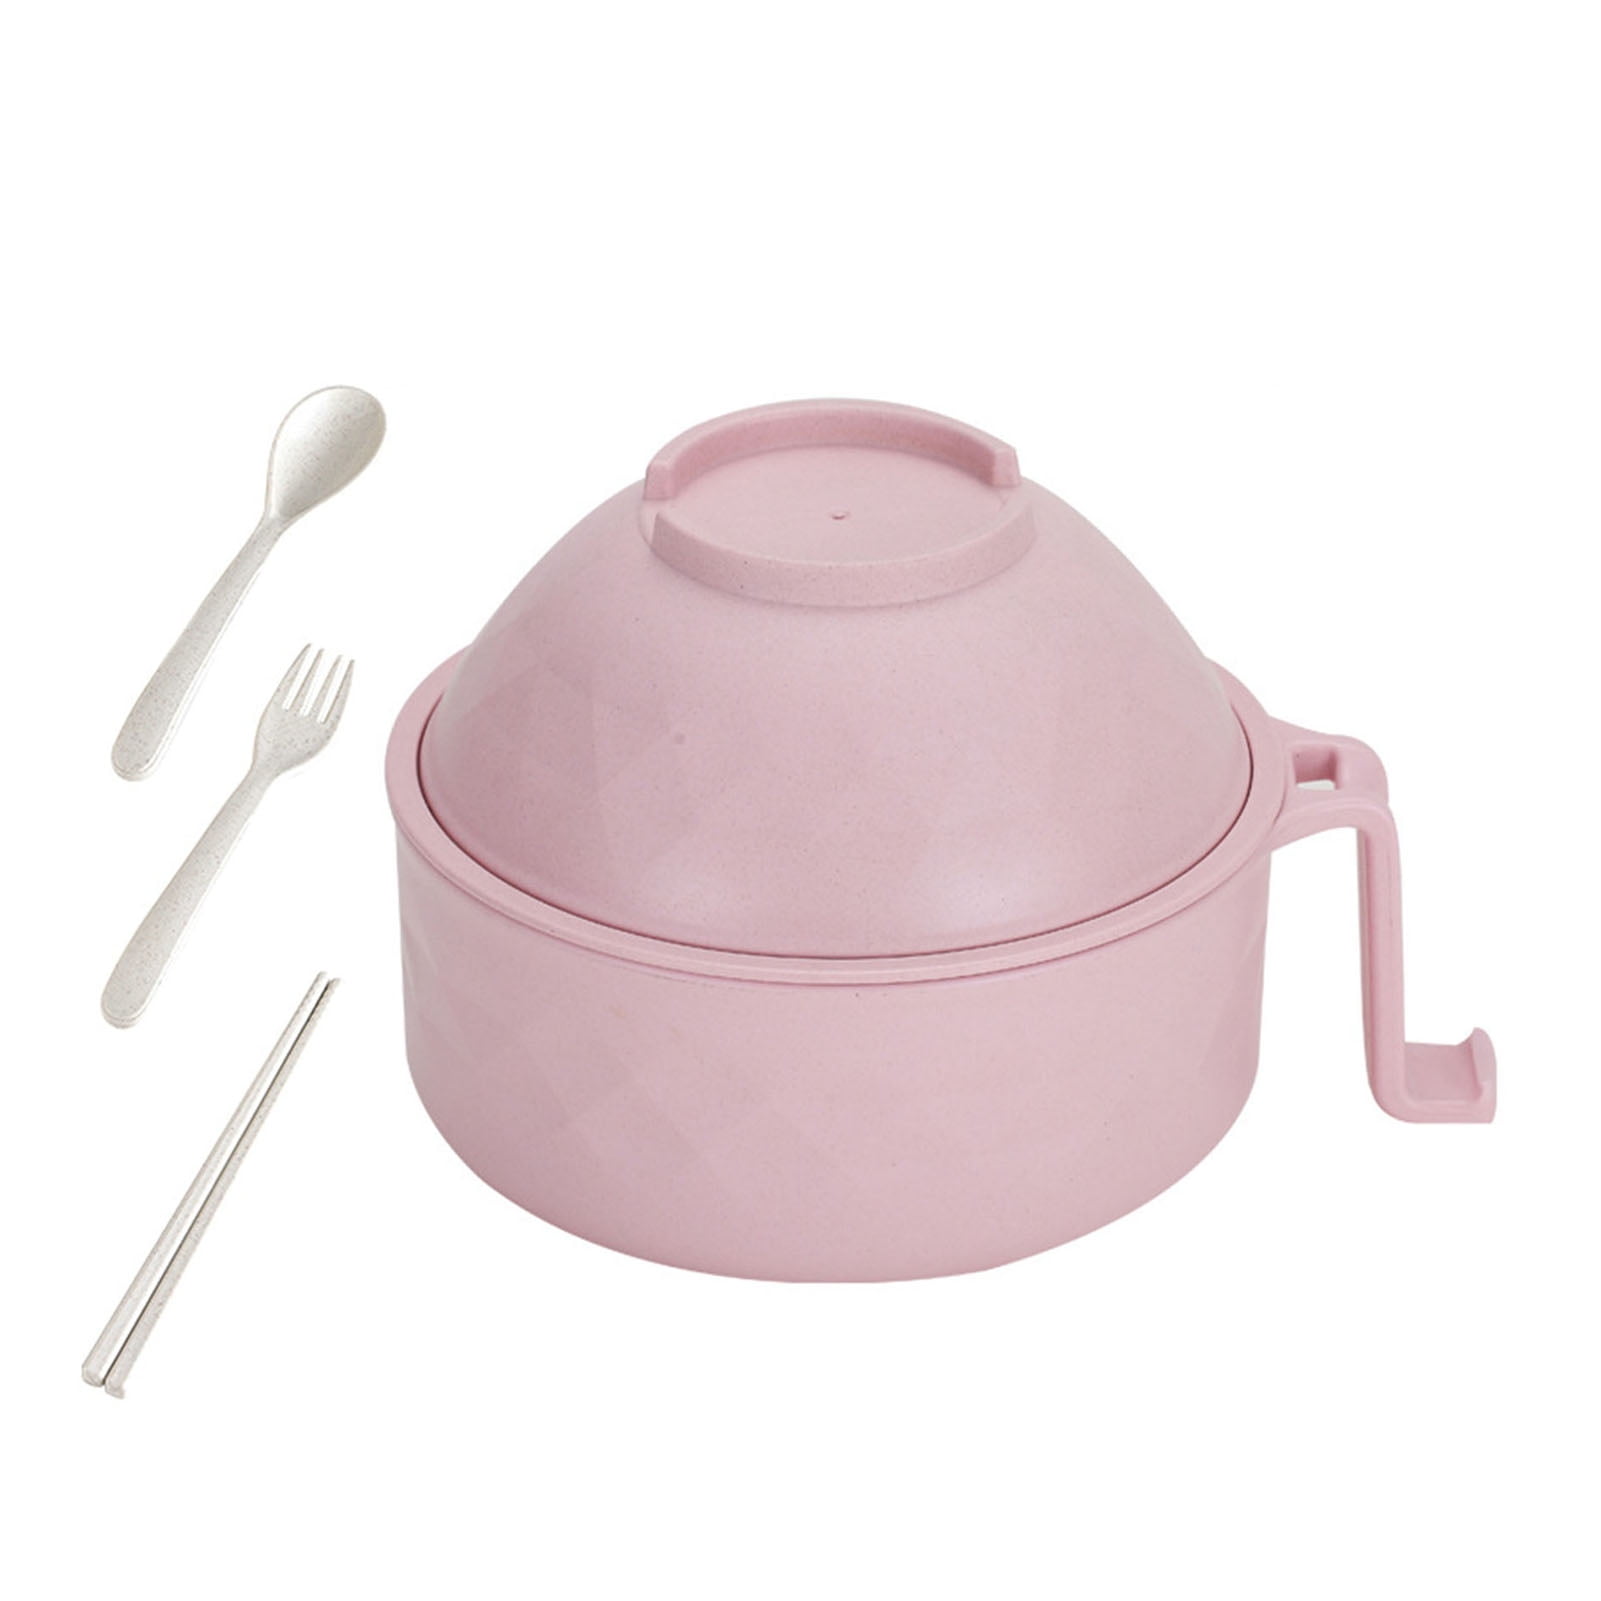 Our Place Lunch Box Set Containers Silverware Chopsticks Pink White A010622